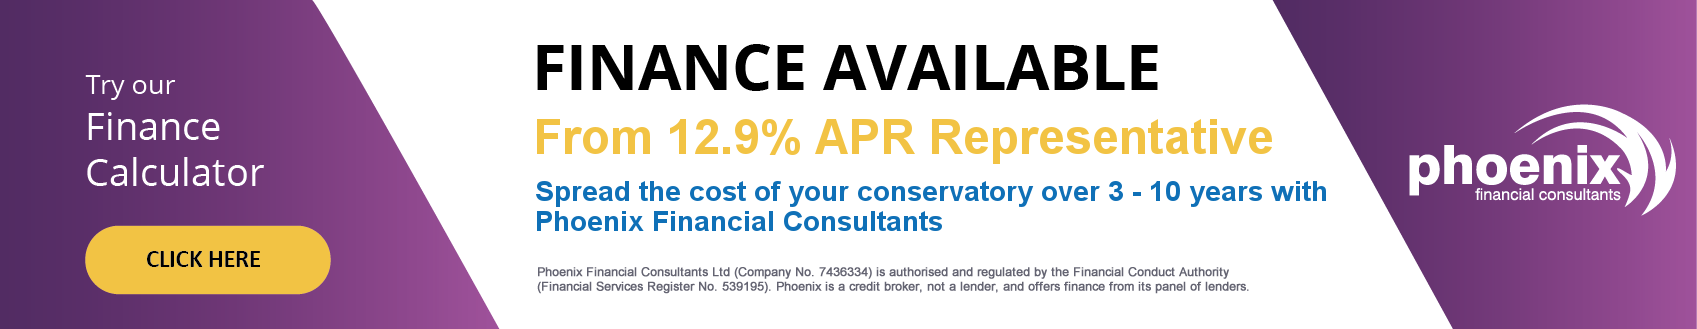 Phoenix Finance Available for Conservatories